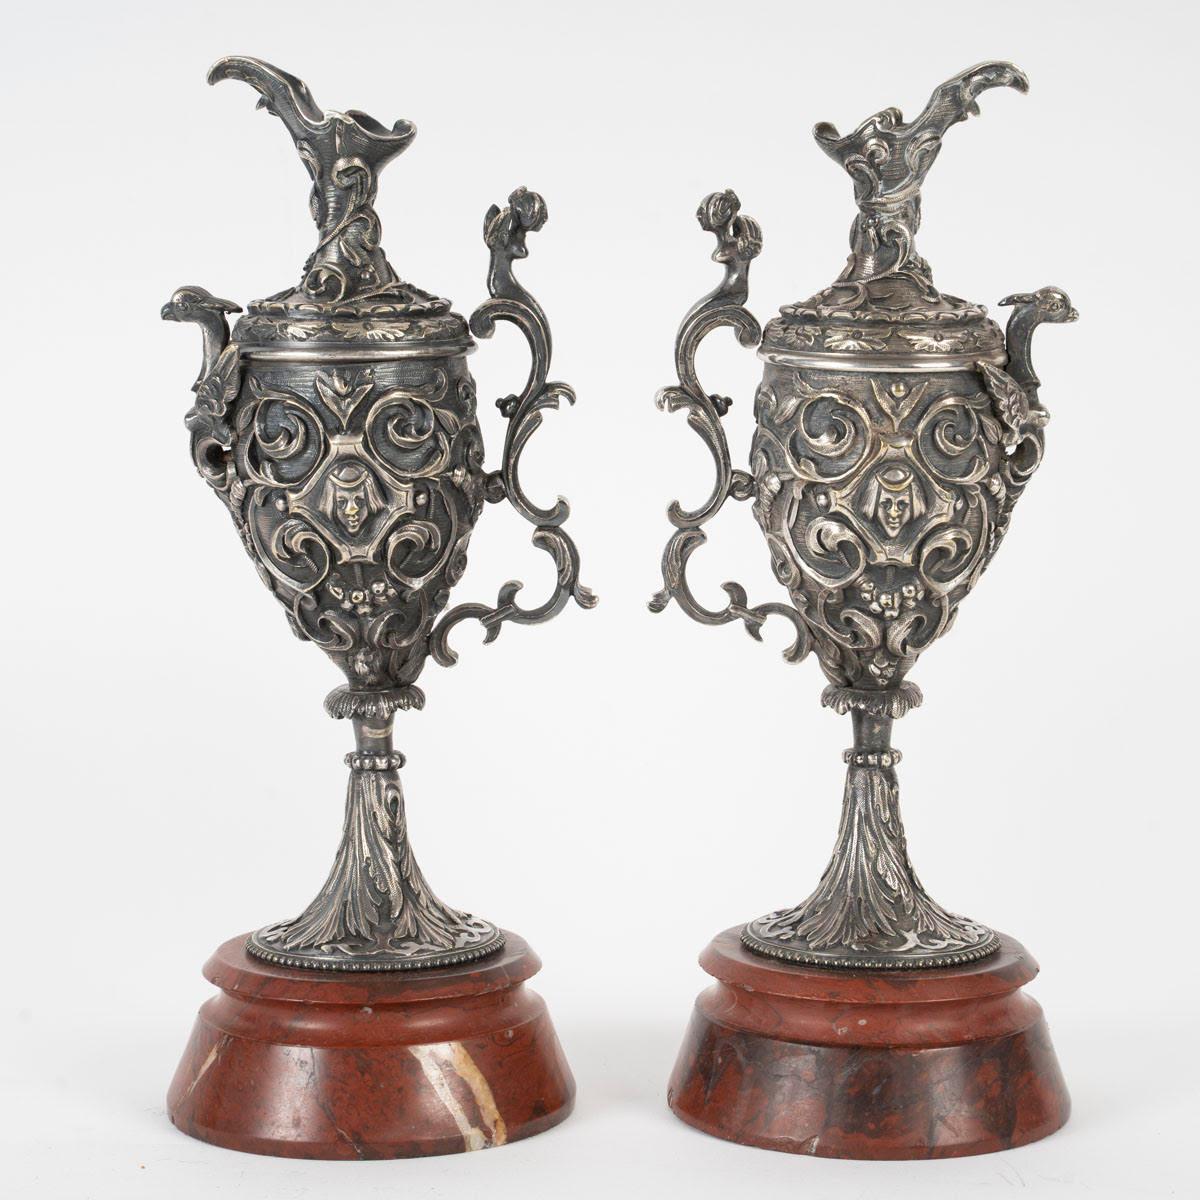 A pair of Napoleon III period silvered bronze ewers with griotte marble bases.

A pair of Napoleon III period ewers, 19th century, in silvered bronze with a griotte marble base.
h: 26.5cm, w: 12cm, d: 10cm